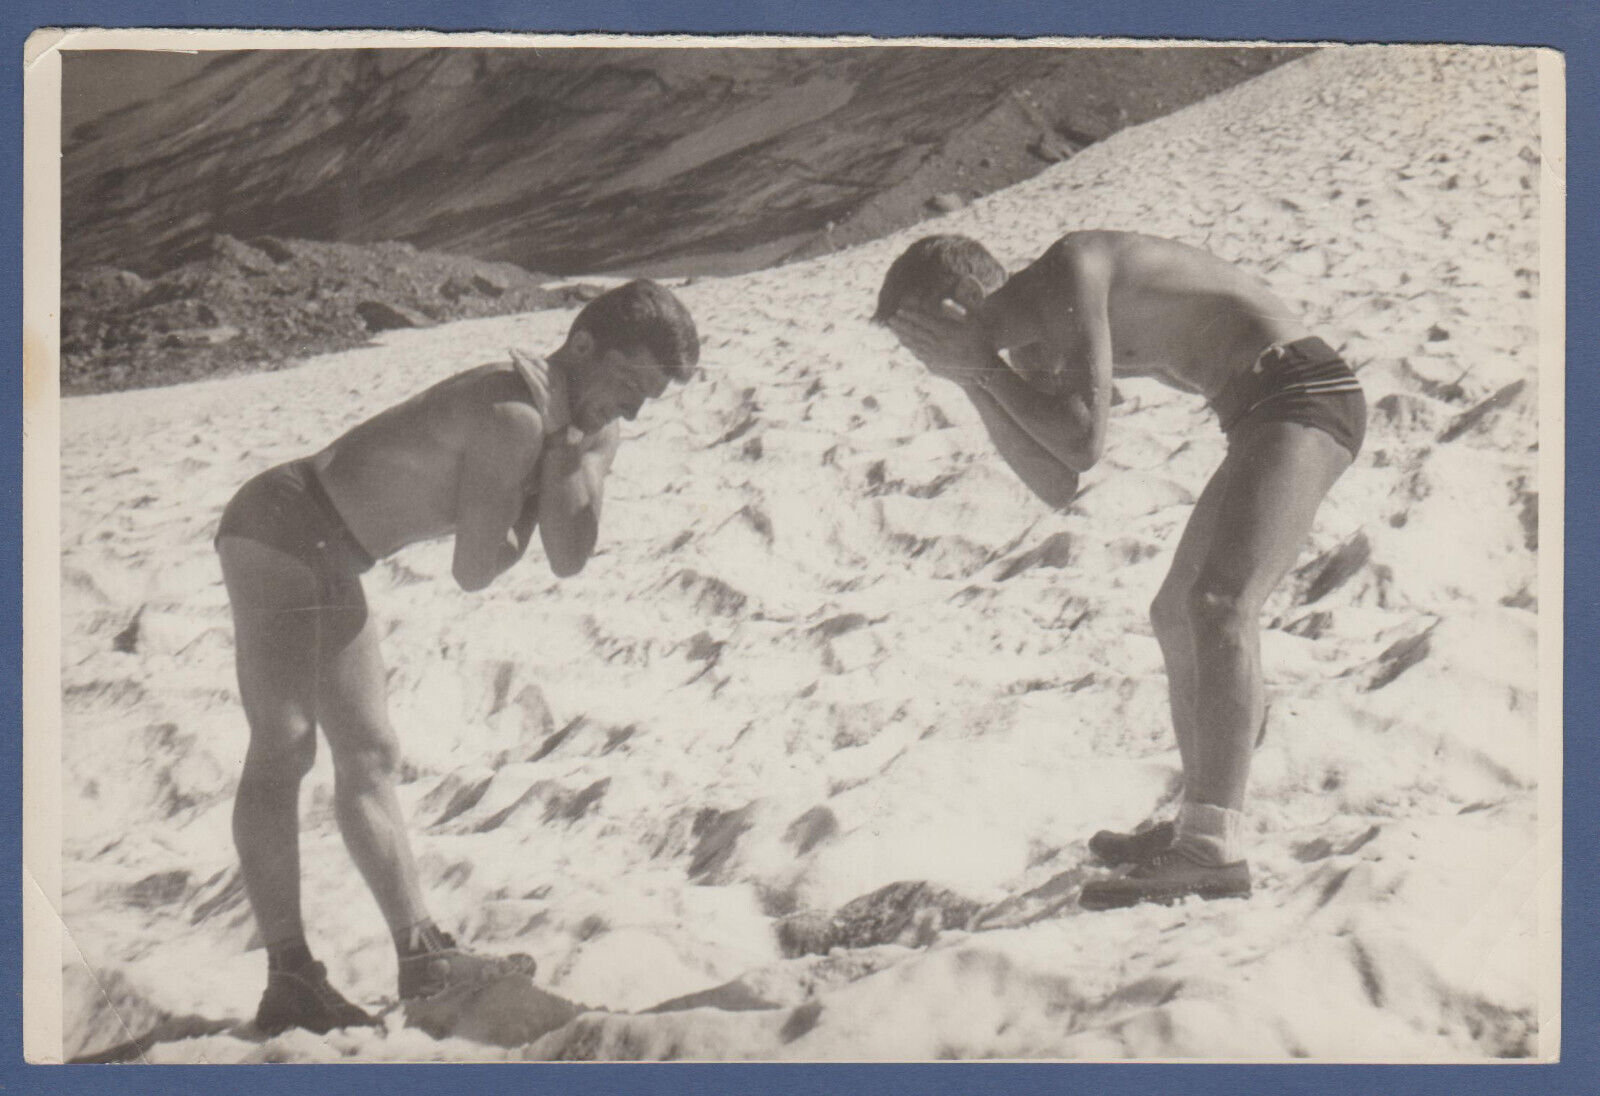 Shirtless guys in trunks on the snow in mountains naked torso gay int Old Photo